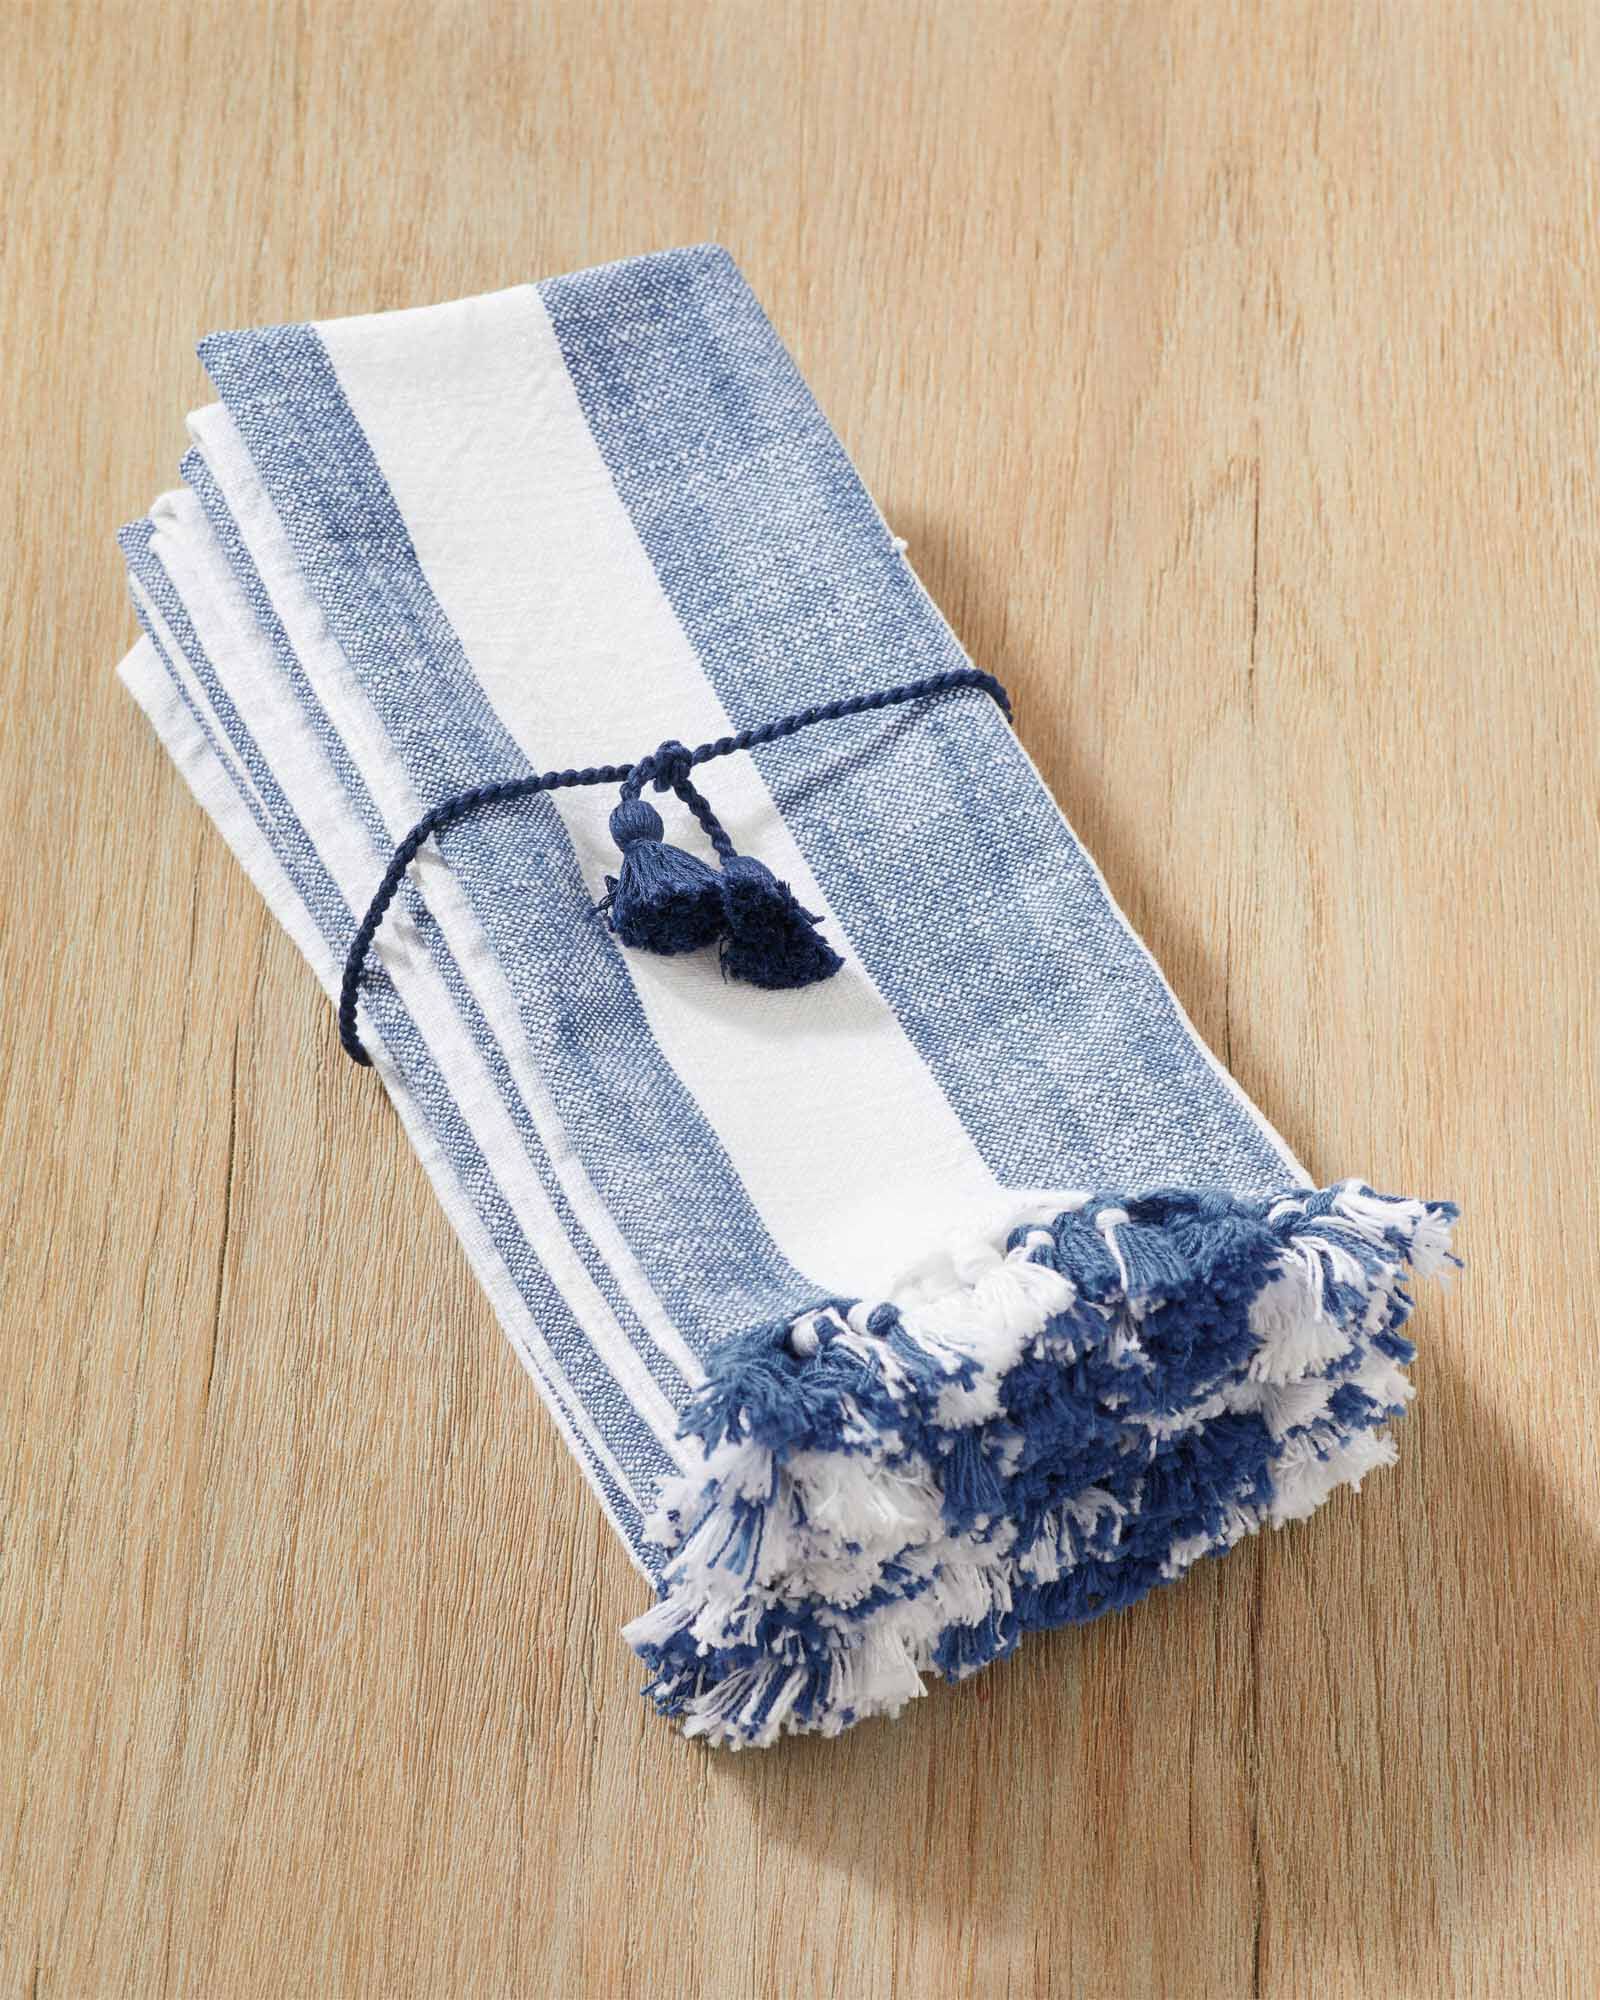 Awning Stripe Napkins | Serena and Lily